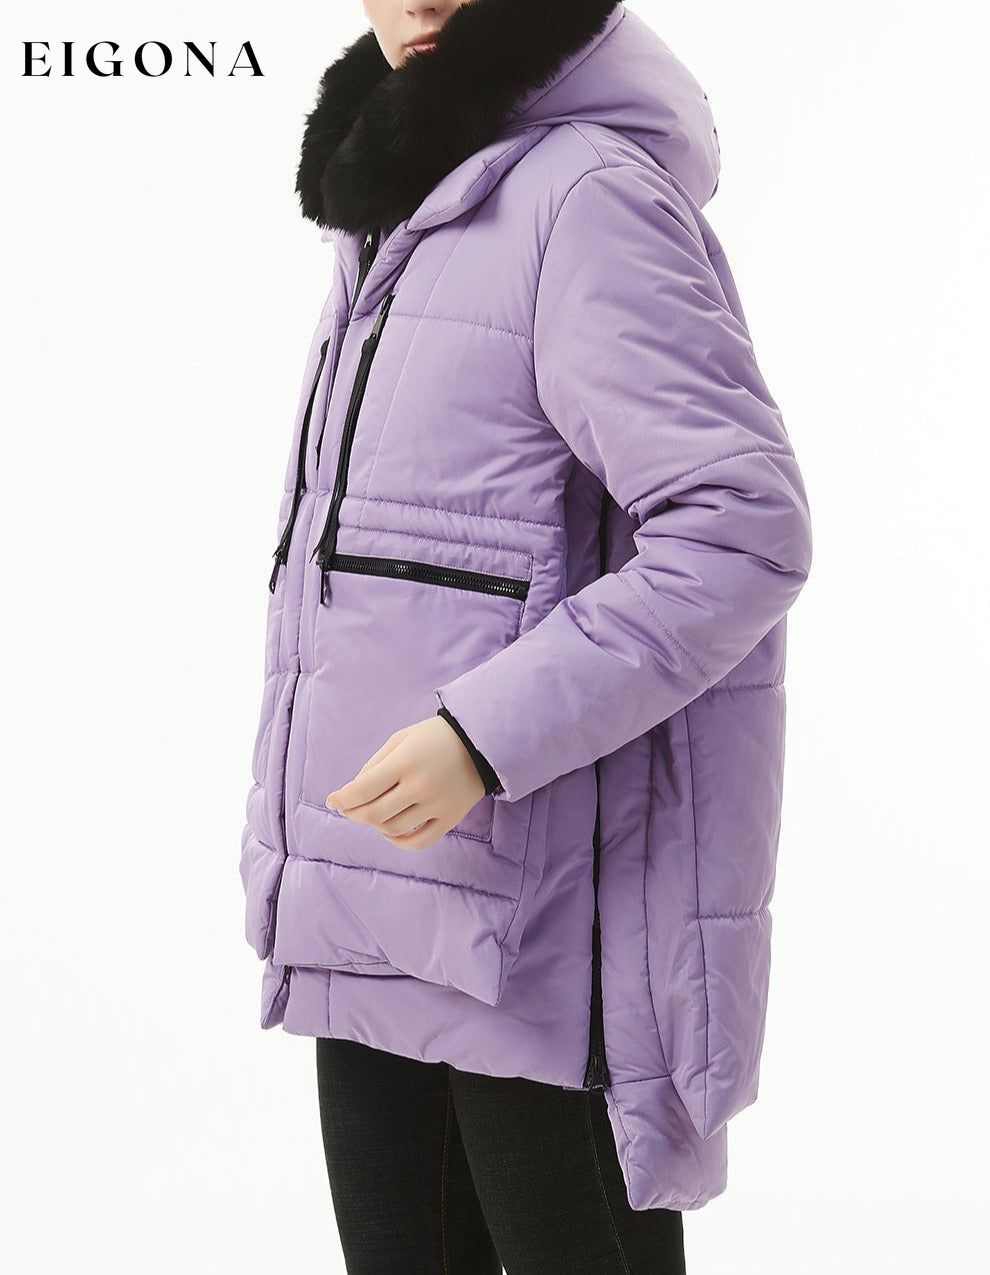 Wisteria Plush Linen Zip Up Hooded Puffer Coat clothes Color Purple Fabric Fleece Jackets & Coats Print Solid Color Season Winter Style Casual